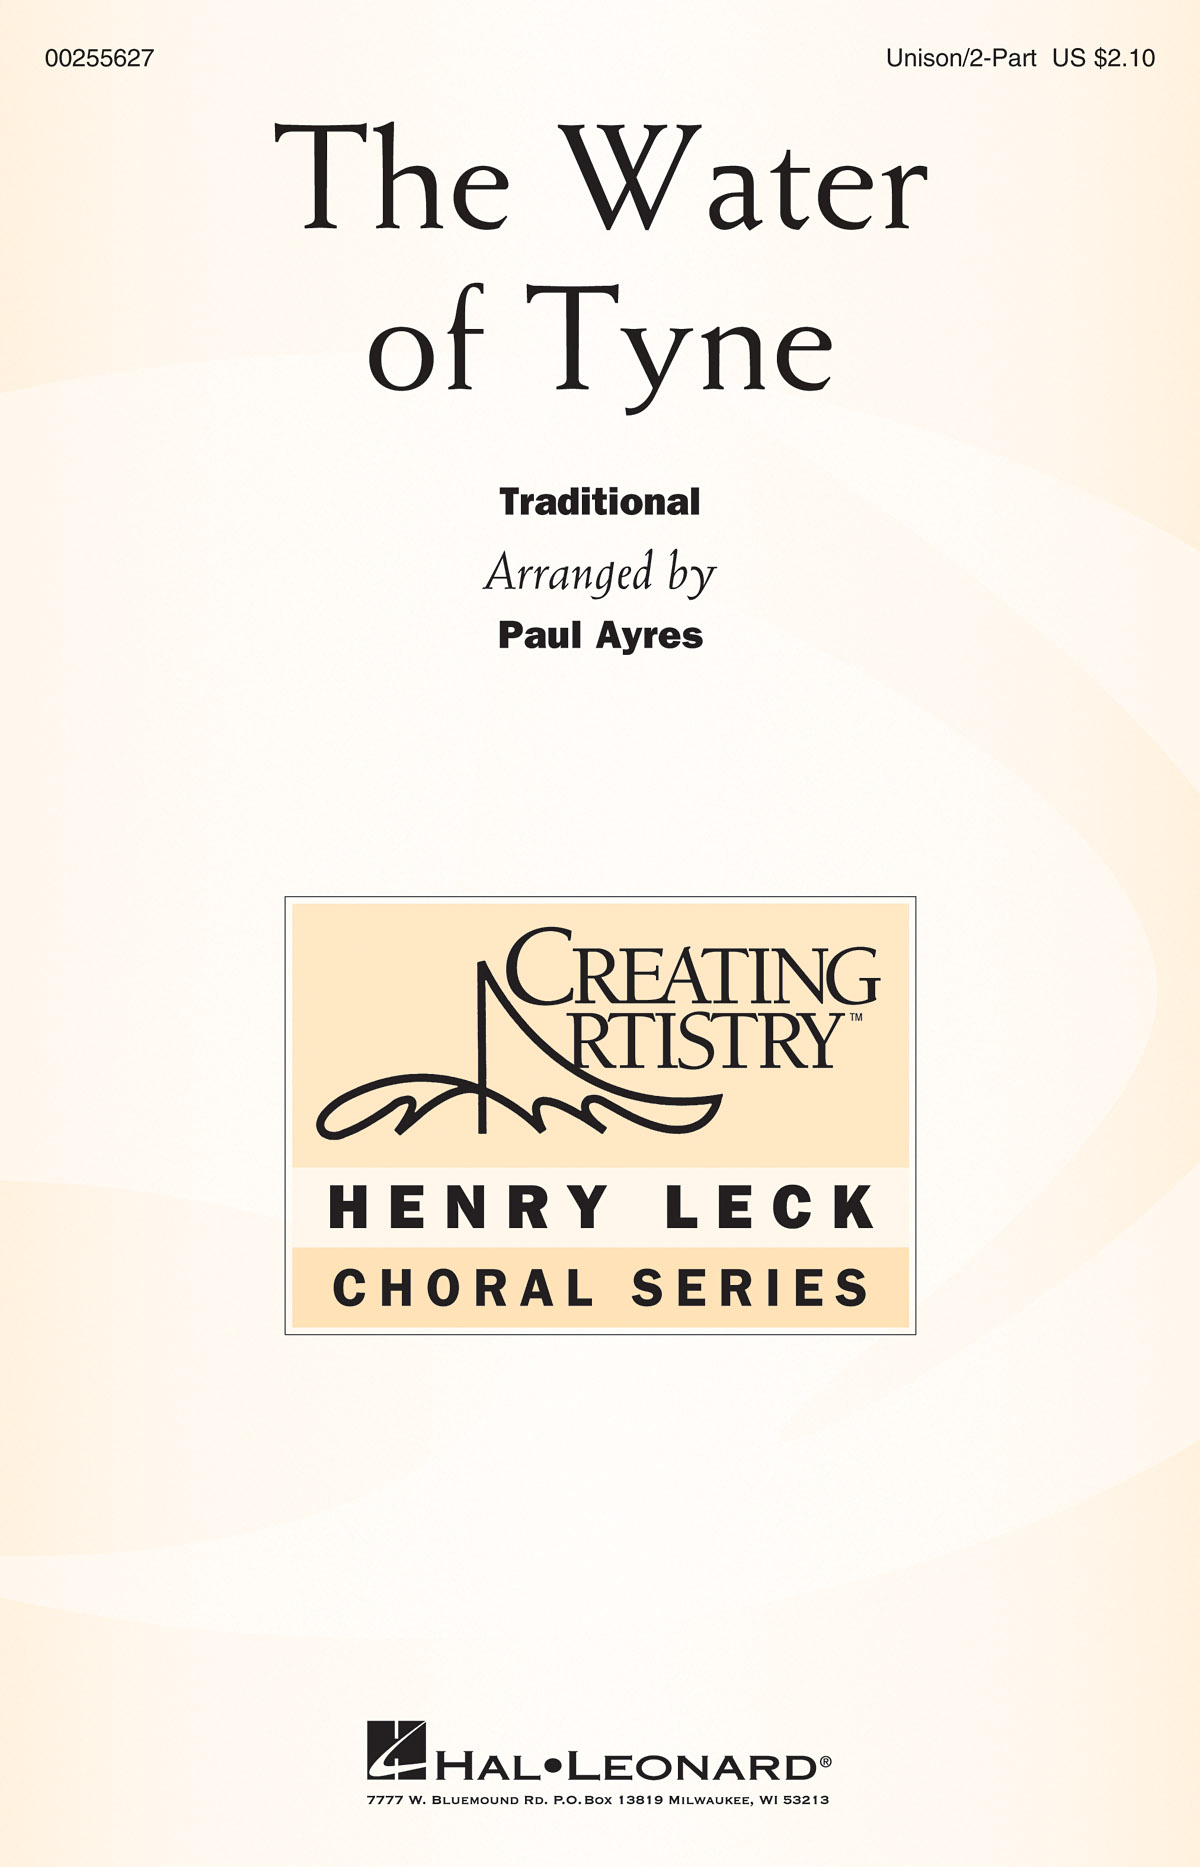 The Water of Tyne: Mixed Choir a Cappella: Vocal Score